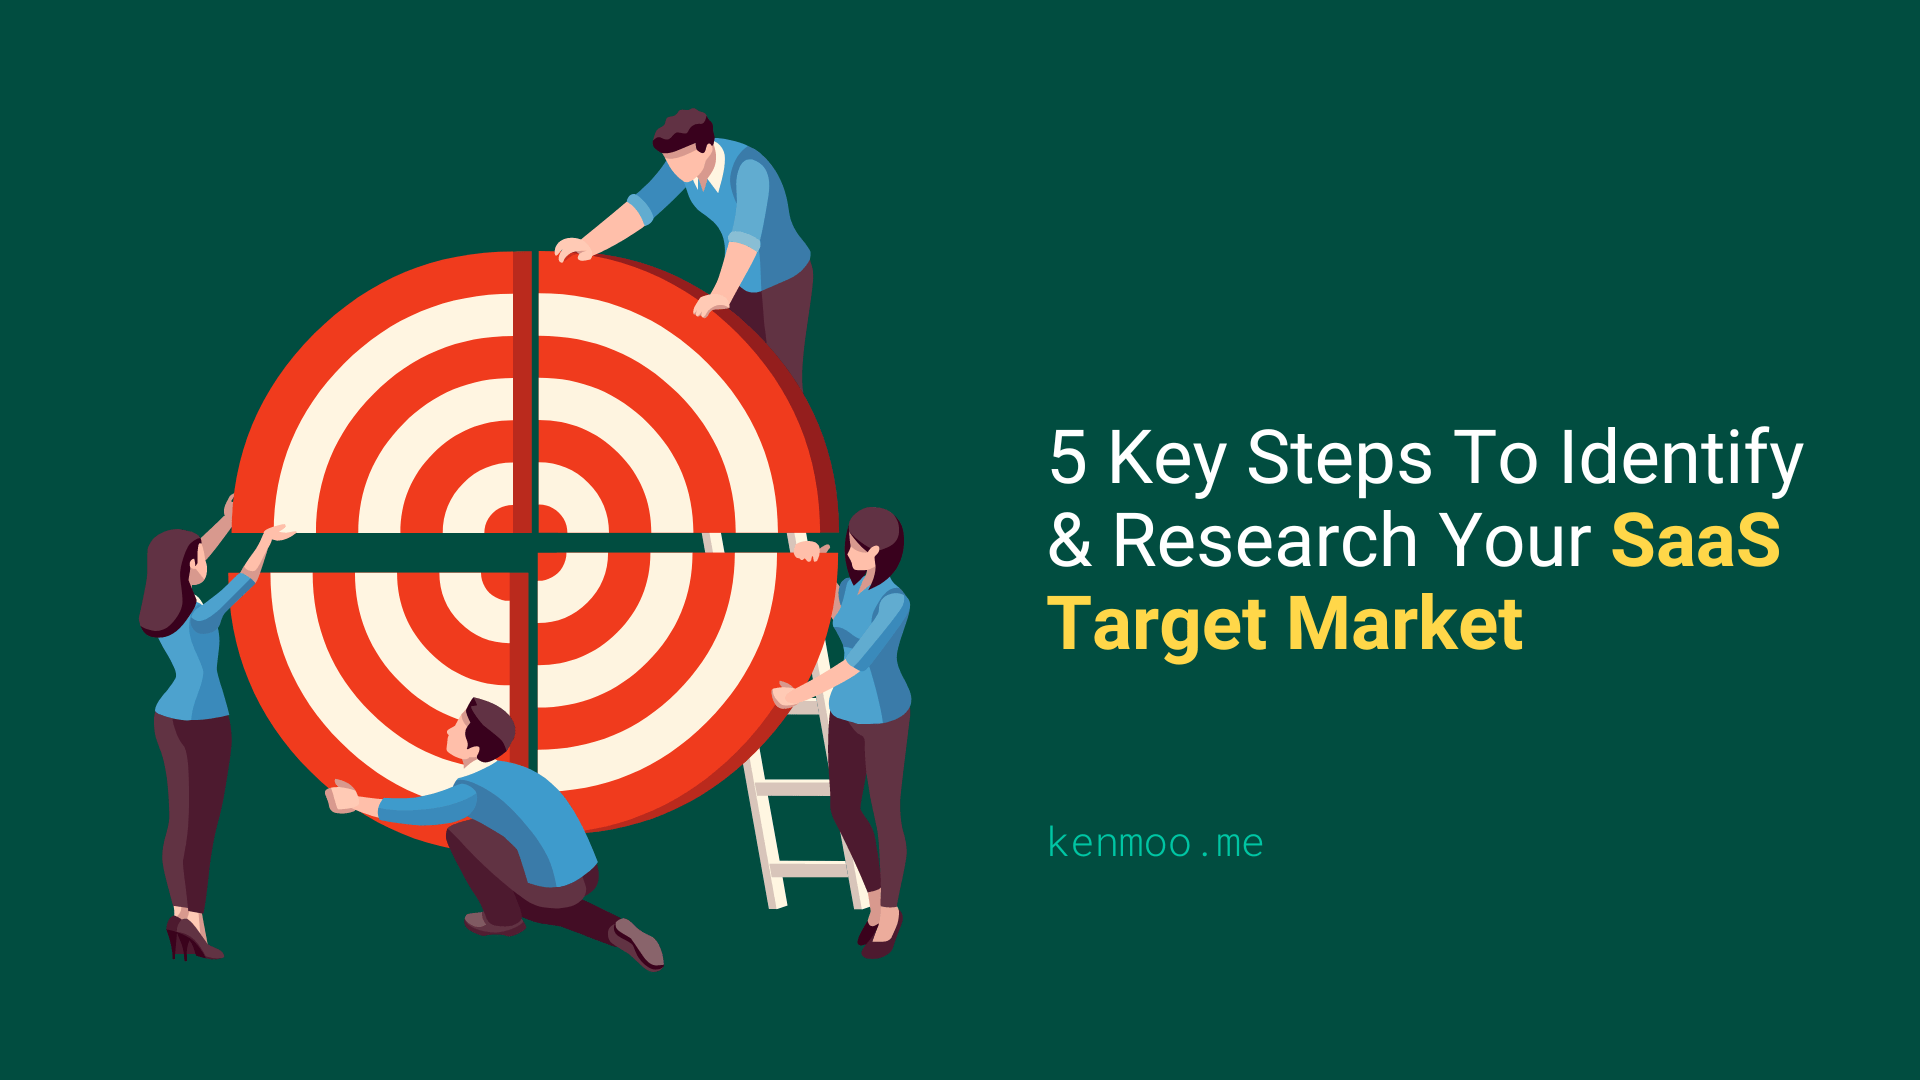 5 Key Steps To Identify & Research Your SaaS Target Market